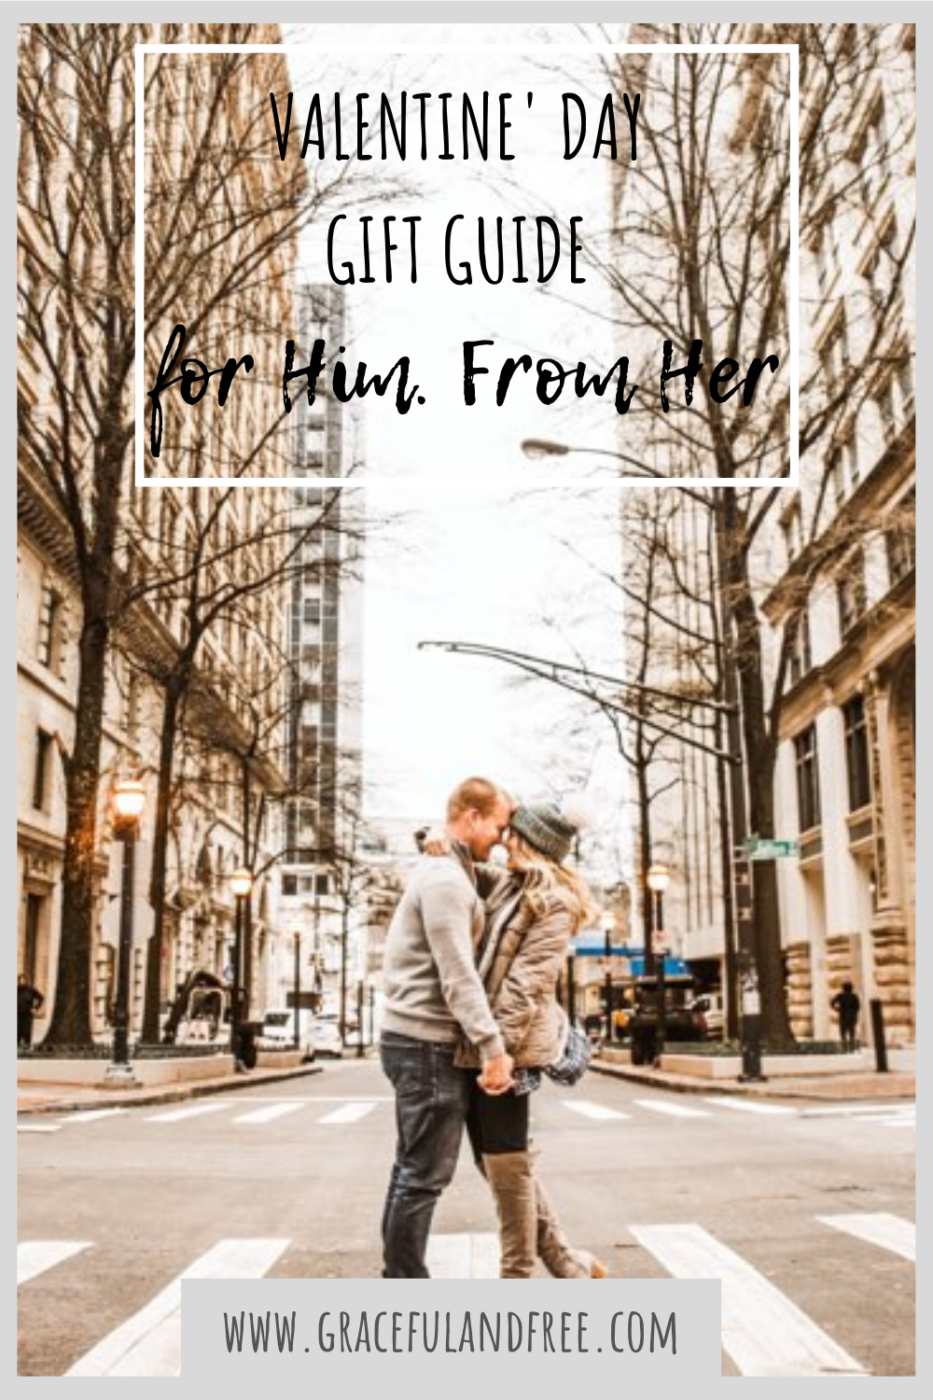 Valentine's Day Gift Guide for Him